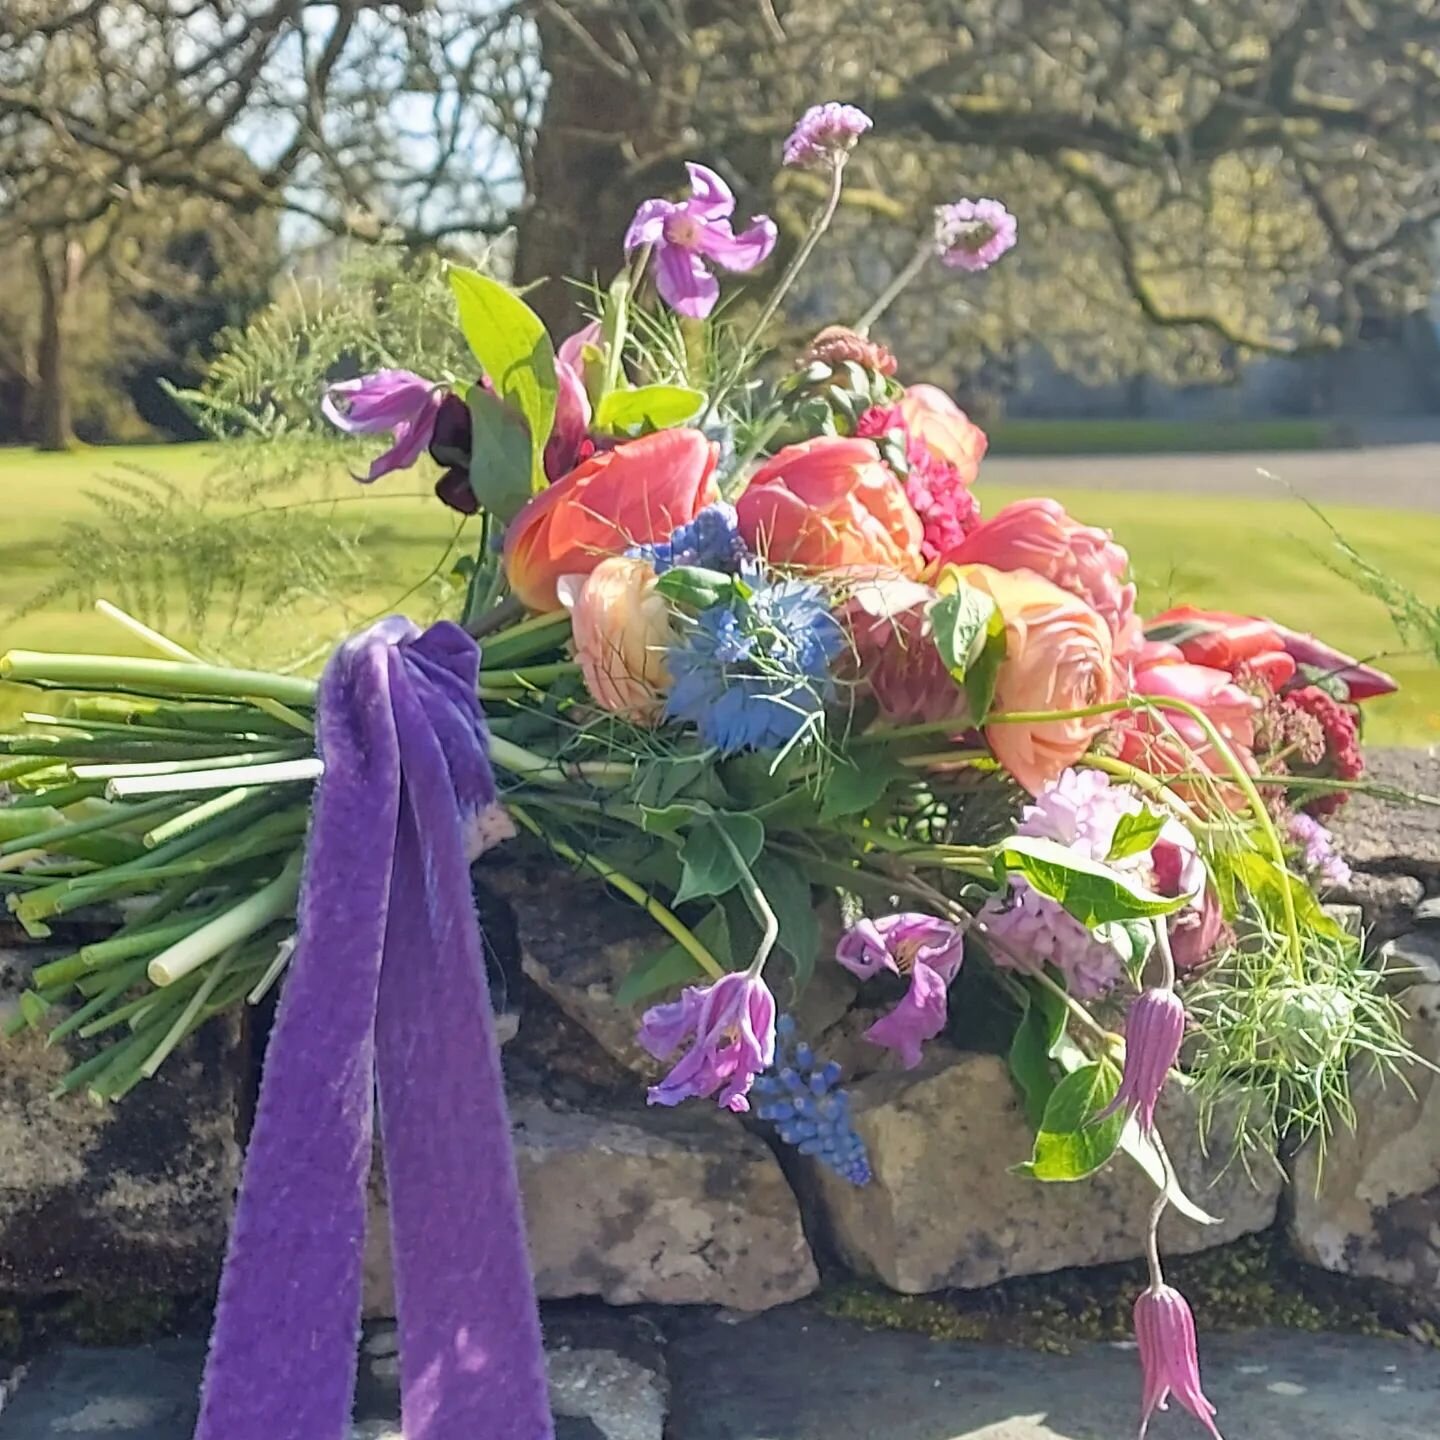 A beautiful bright day in the lakes yesterday. Enjoyed making this colourful bridal bouquet with the most exquisite tulips, such an under rated flower. #underratedtulips #flowerschool #heatherandmoss #tallulahroseflowerschool #heatherandmossflowers #